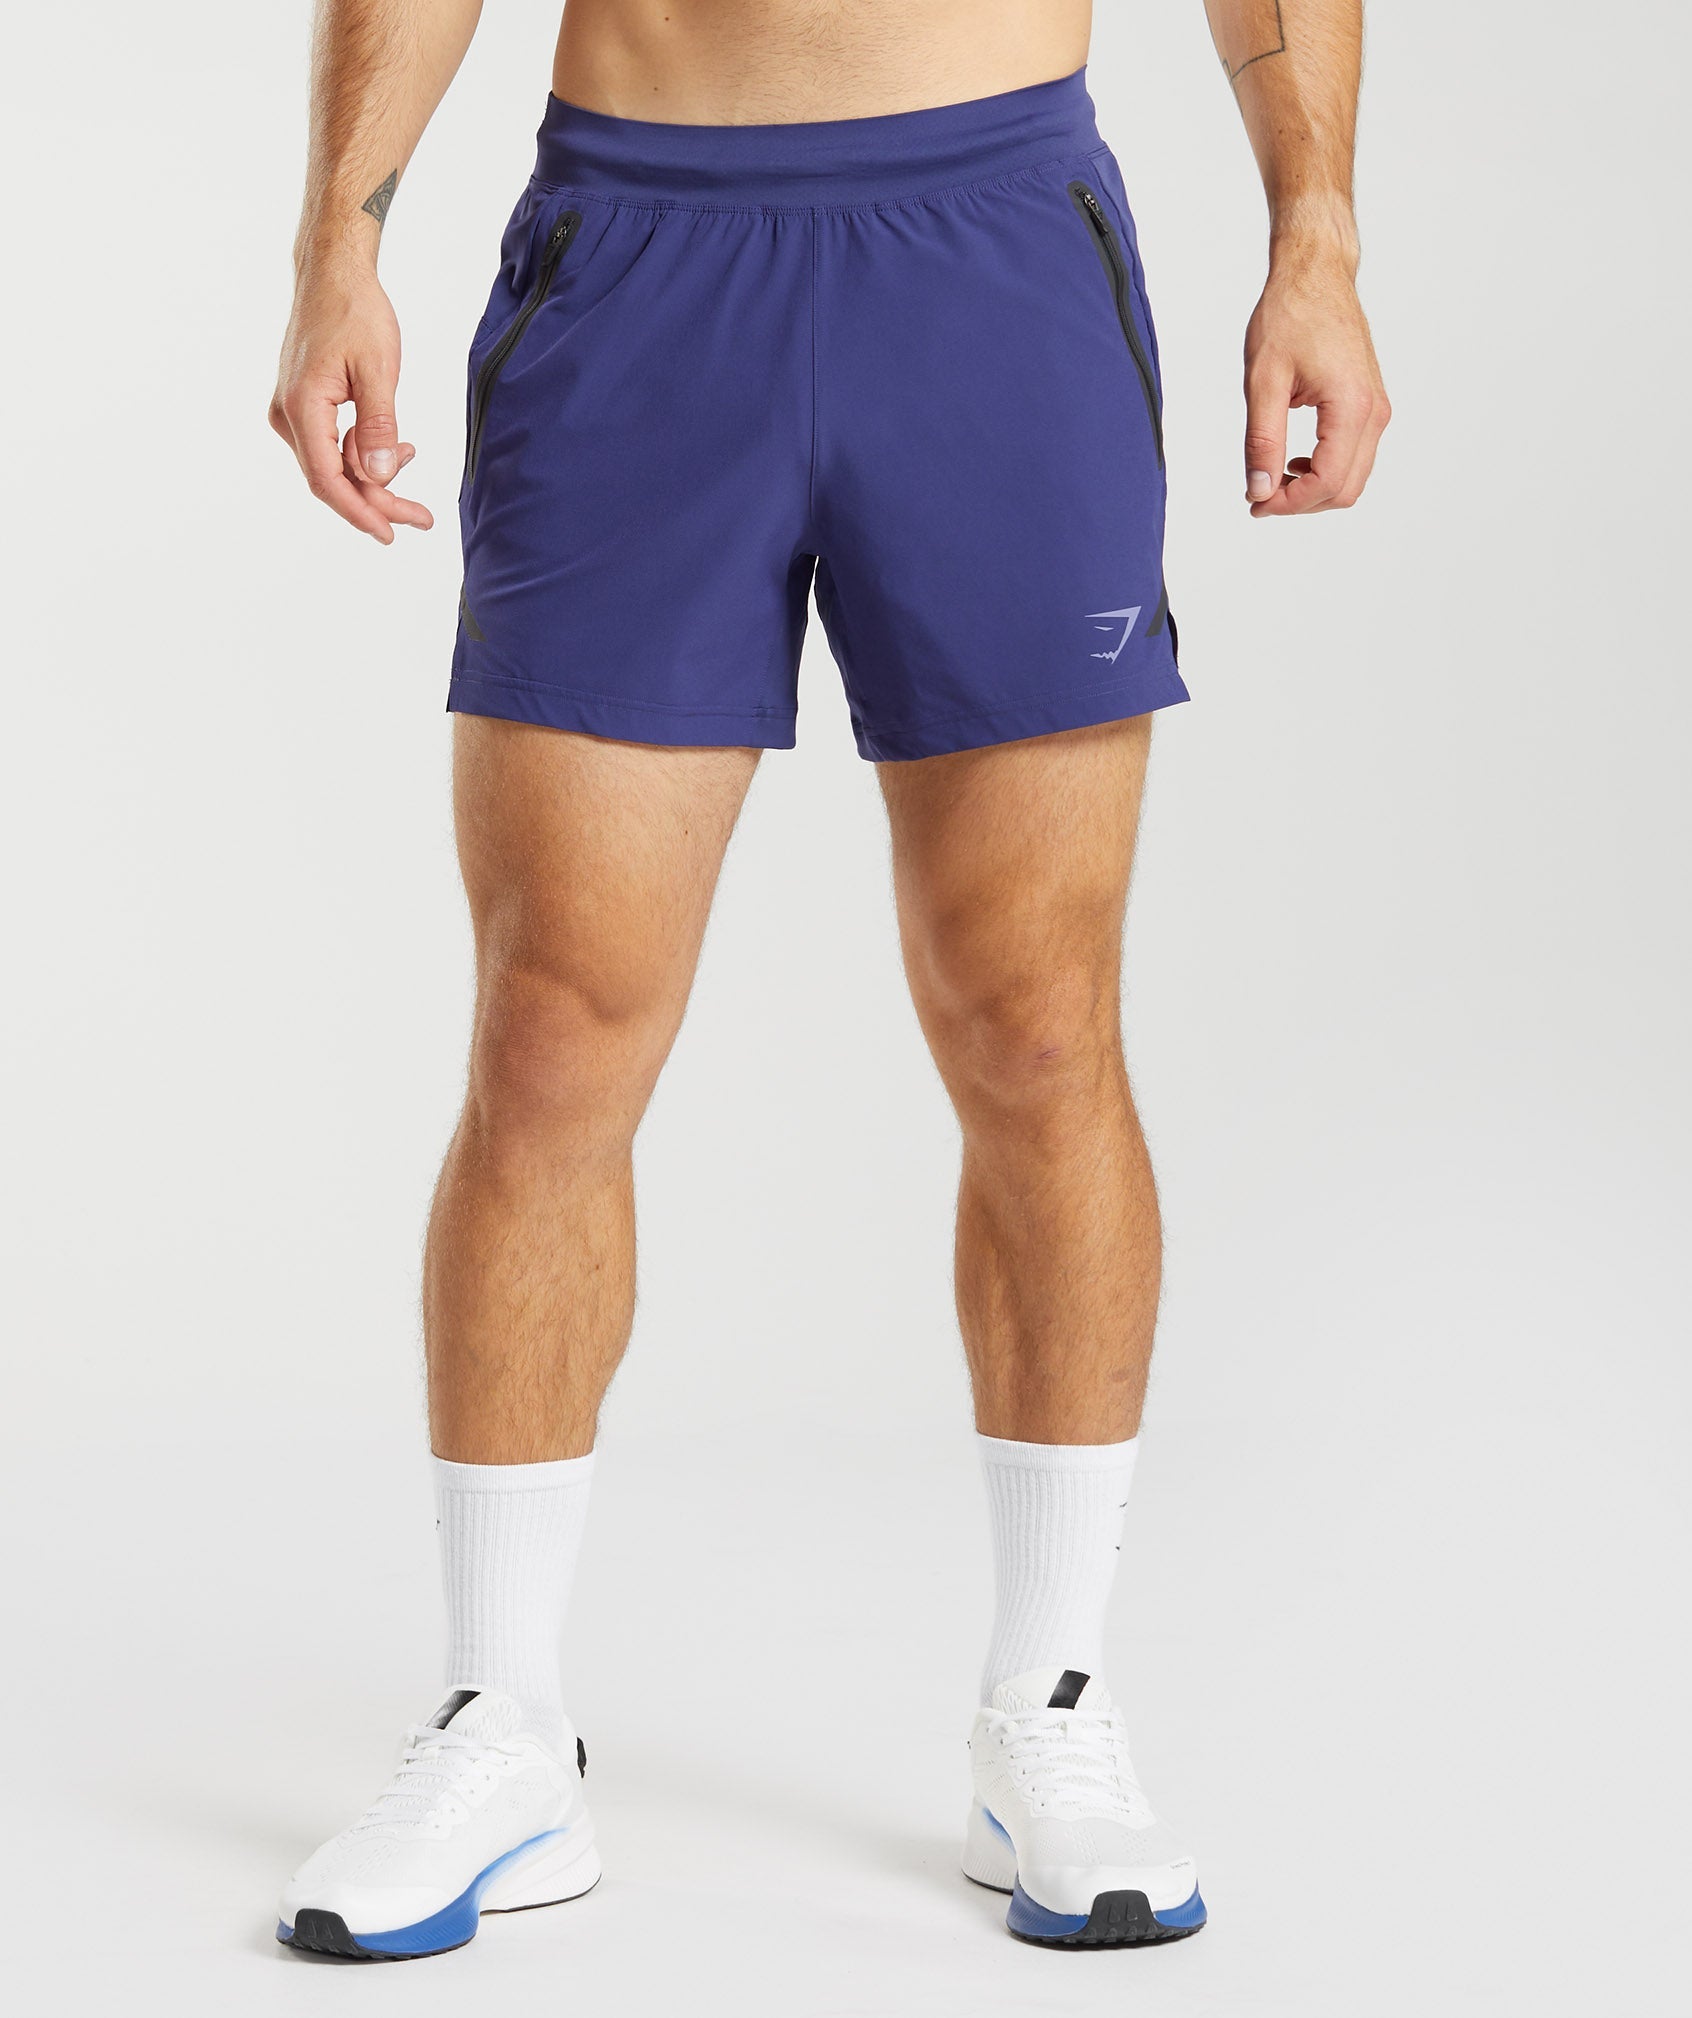 Apex 5" Perform Shorts in Neptune Purple - view 1